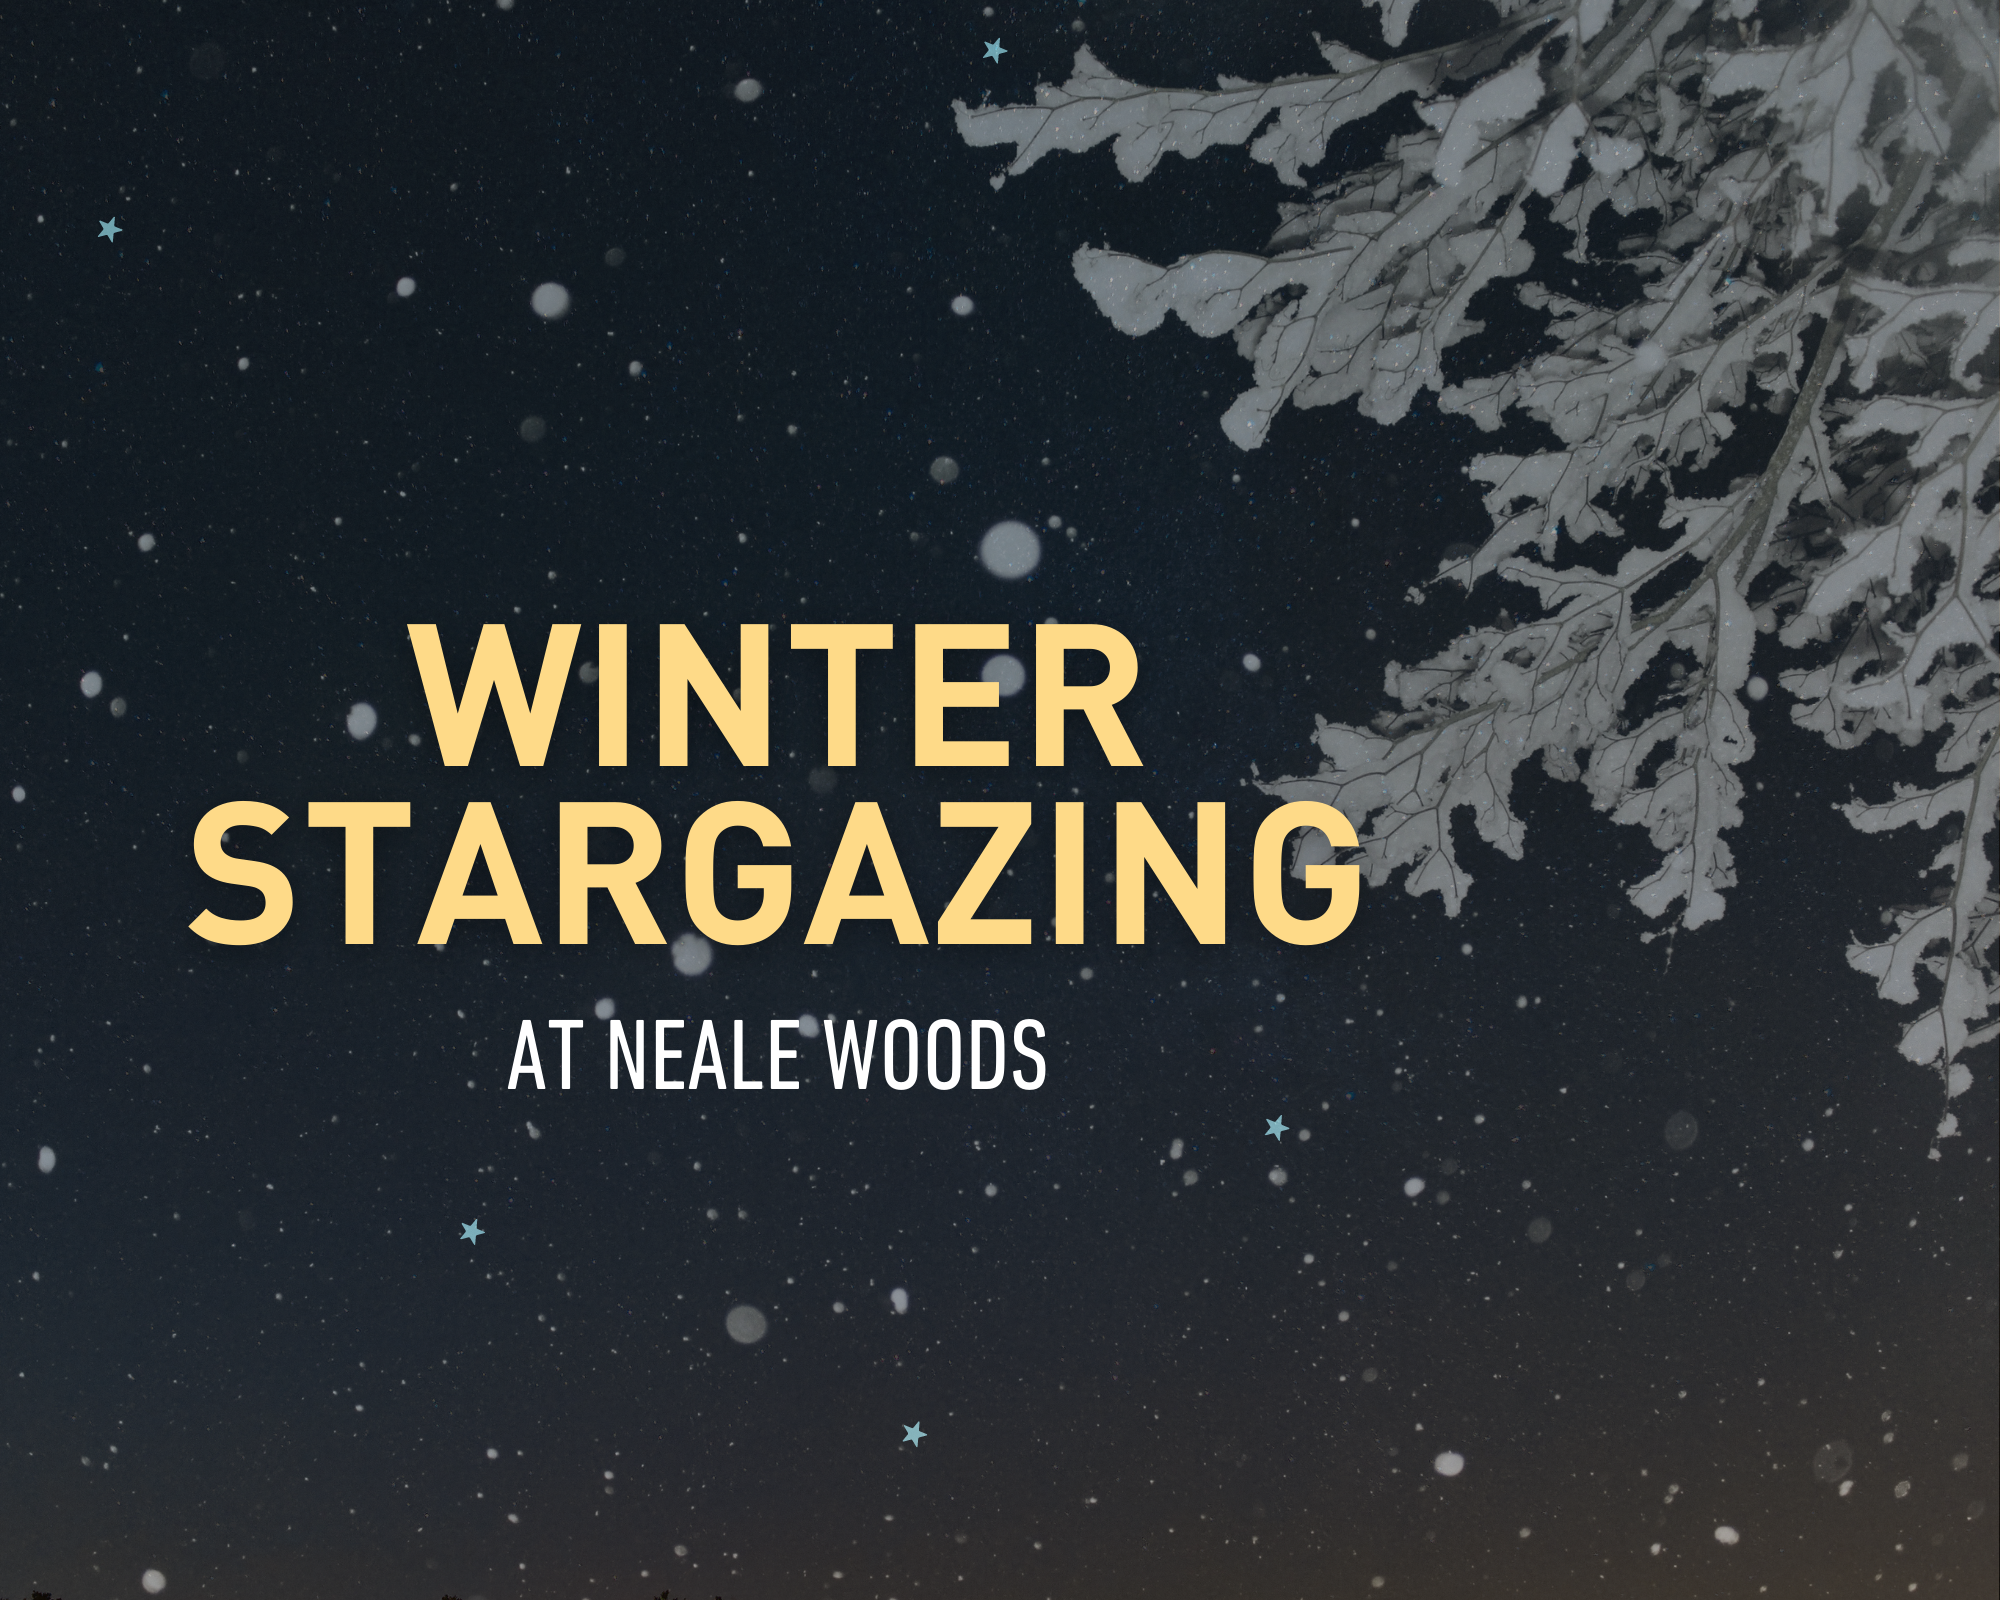 An image of a starry night sky and snowy tree branches overlayed by the words "Winter Stargazing at Neale Woods."